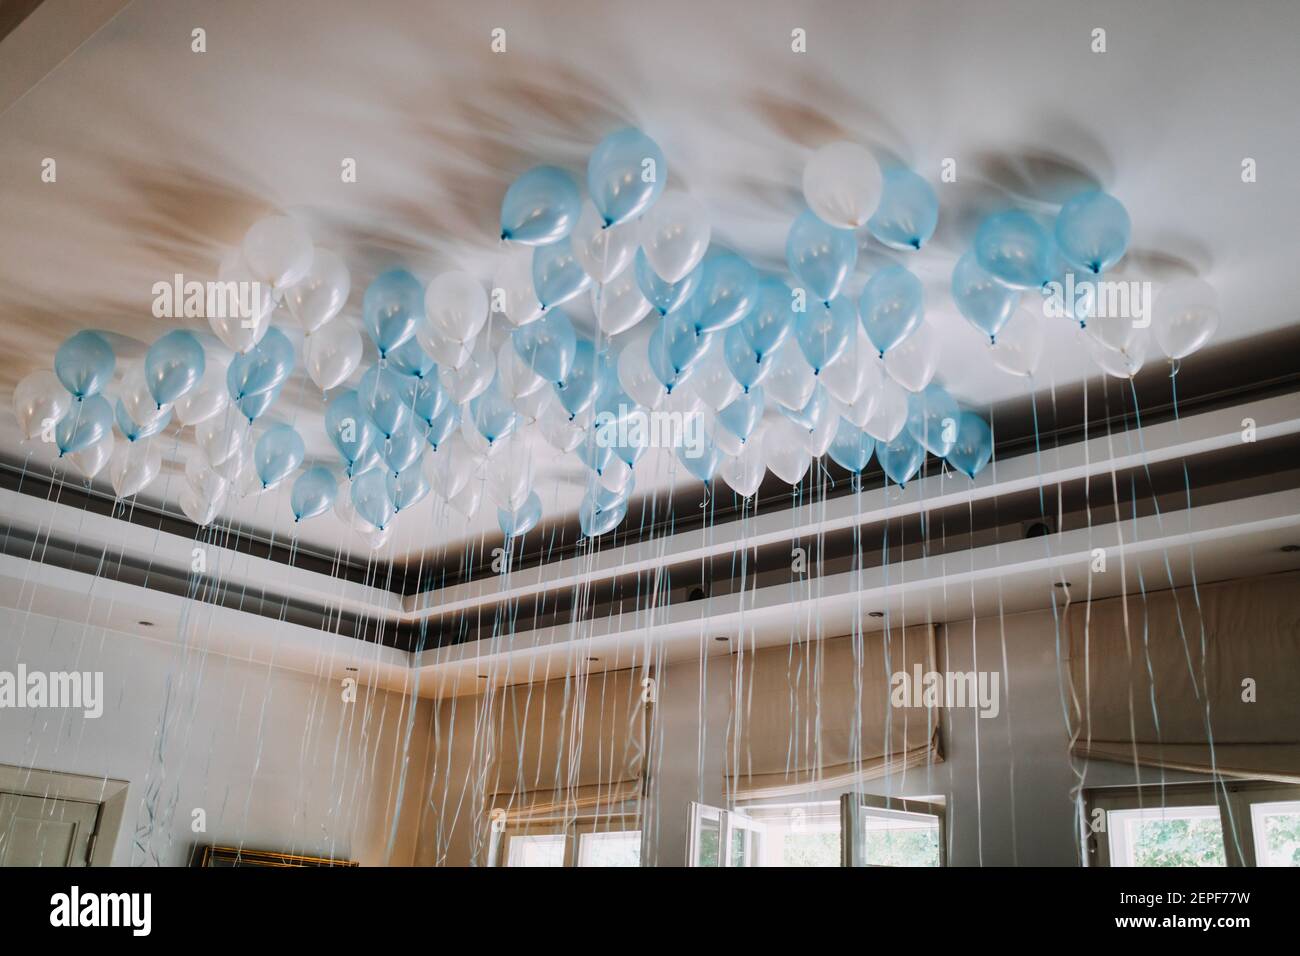 photo of helium balloons on the ceiling Stock Photo